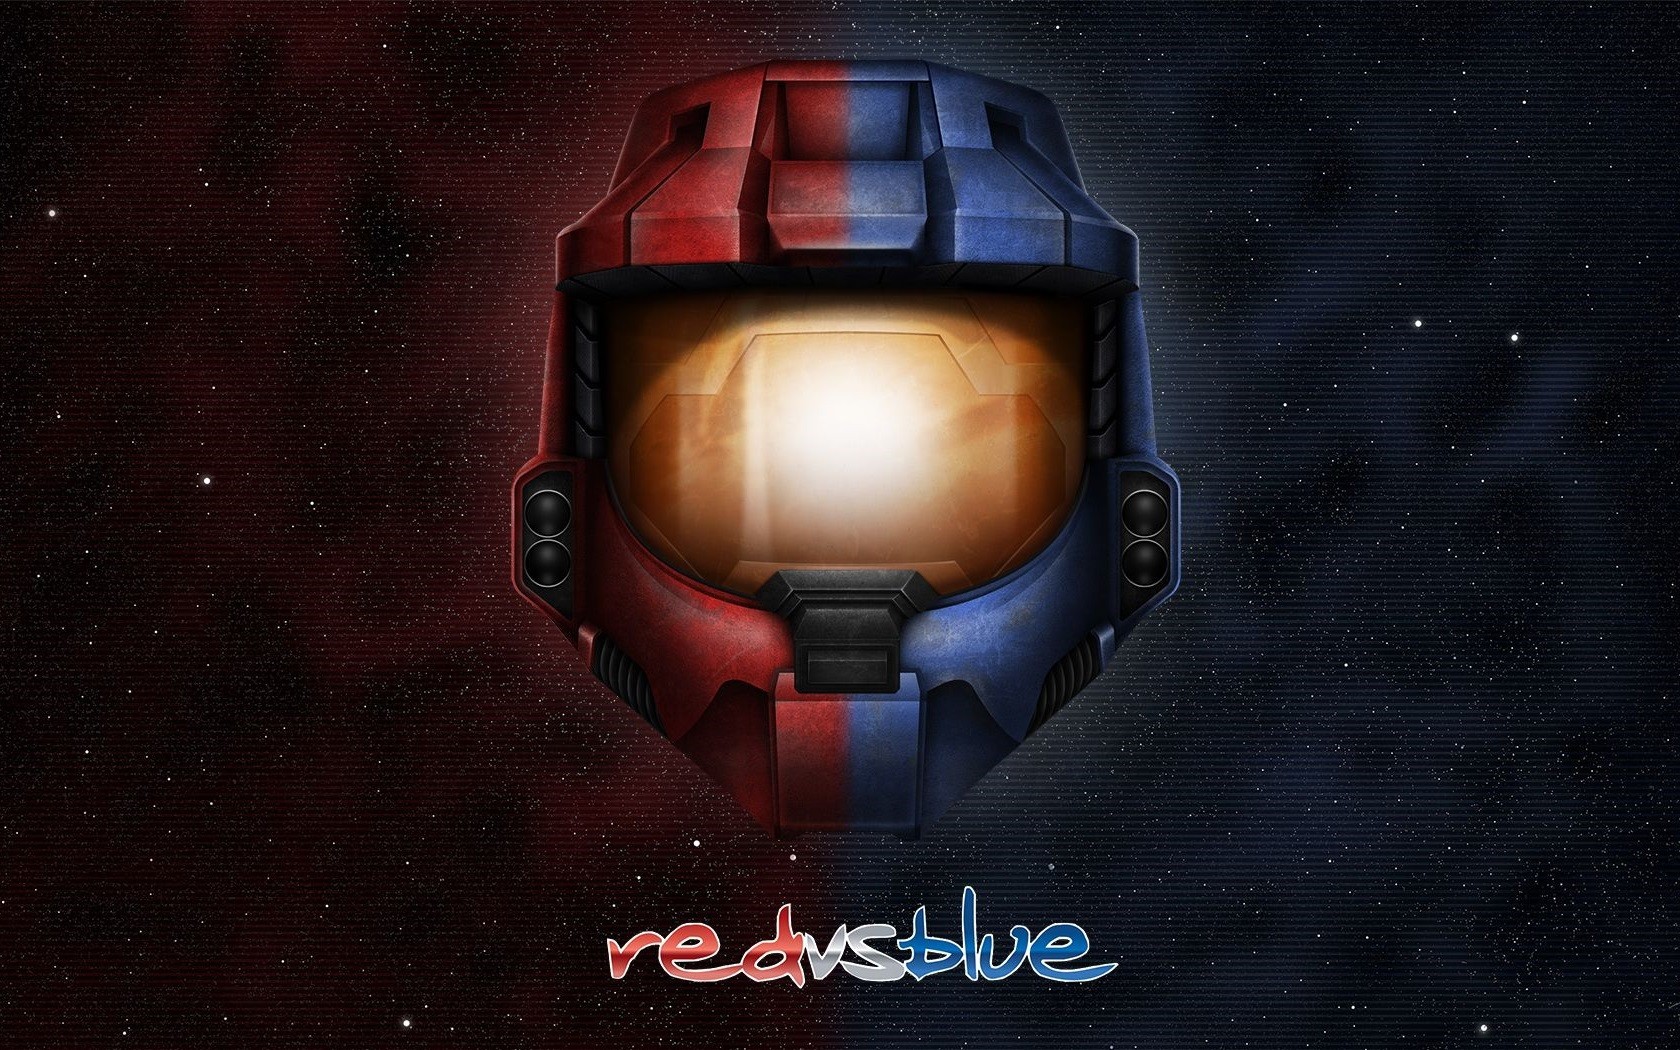 Cartoon Red vs. Blue wallpapers and images - wallpapers, pictures